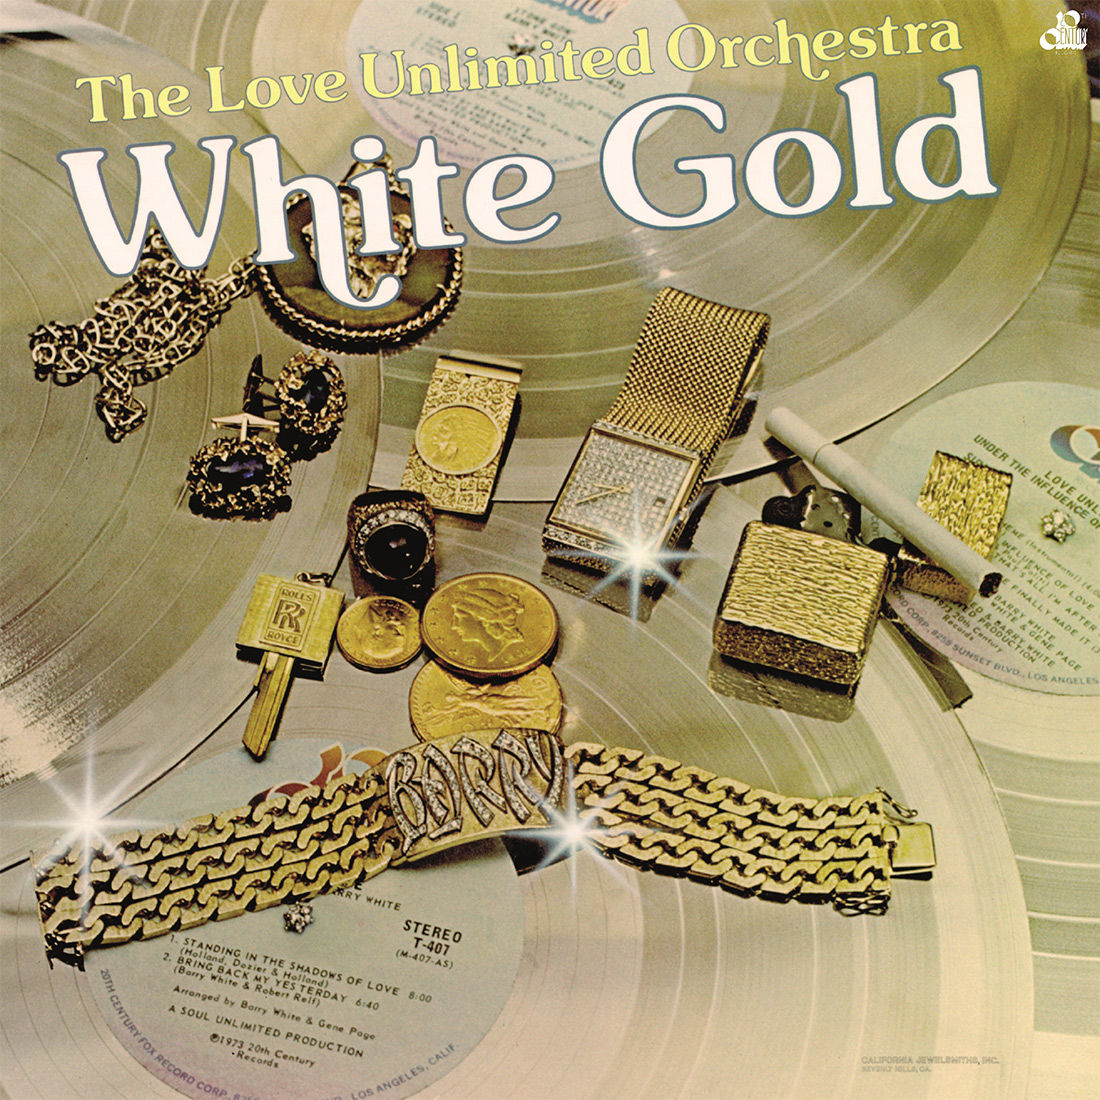 The Love Unlimited Orchestra - White Gold: Vinyl LP